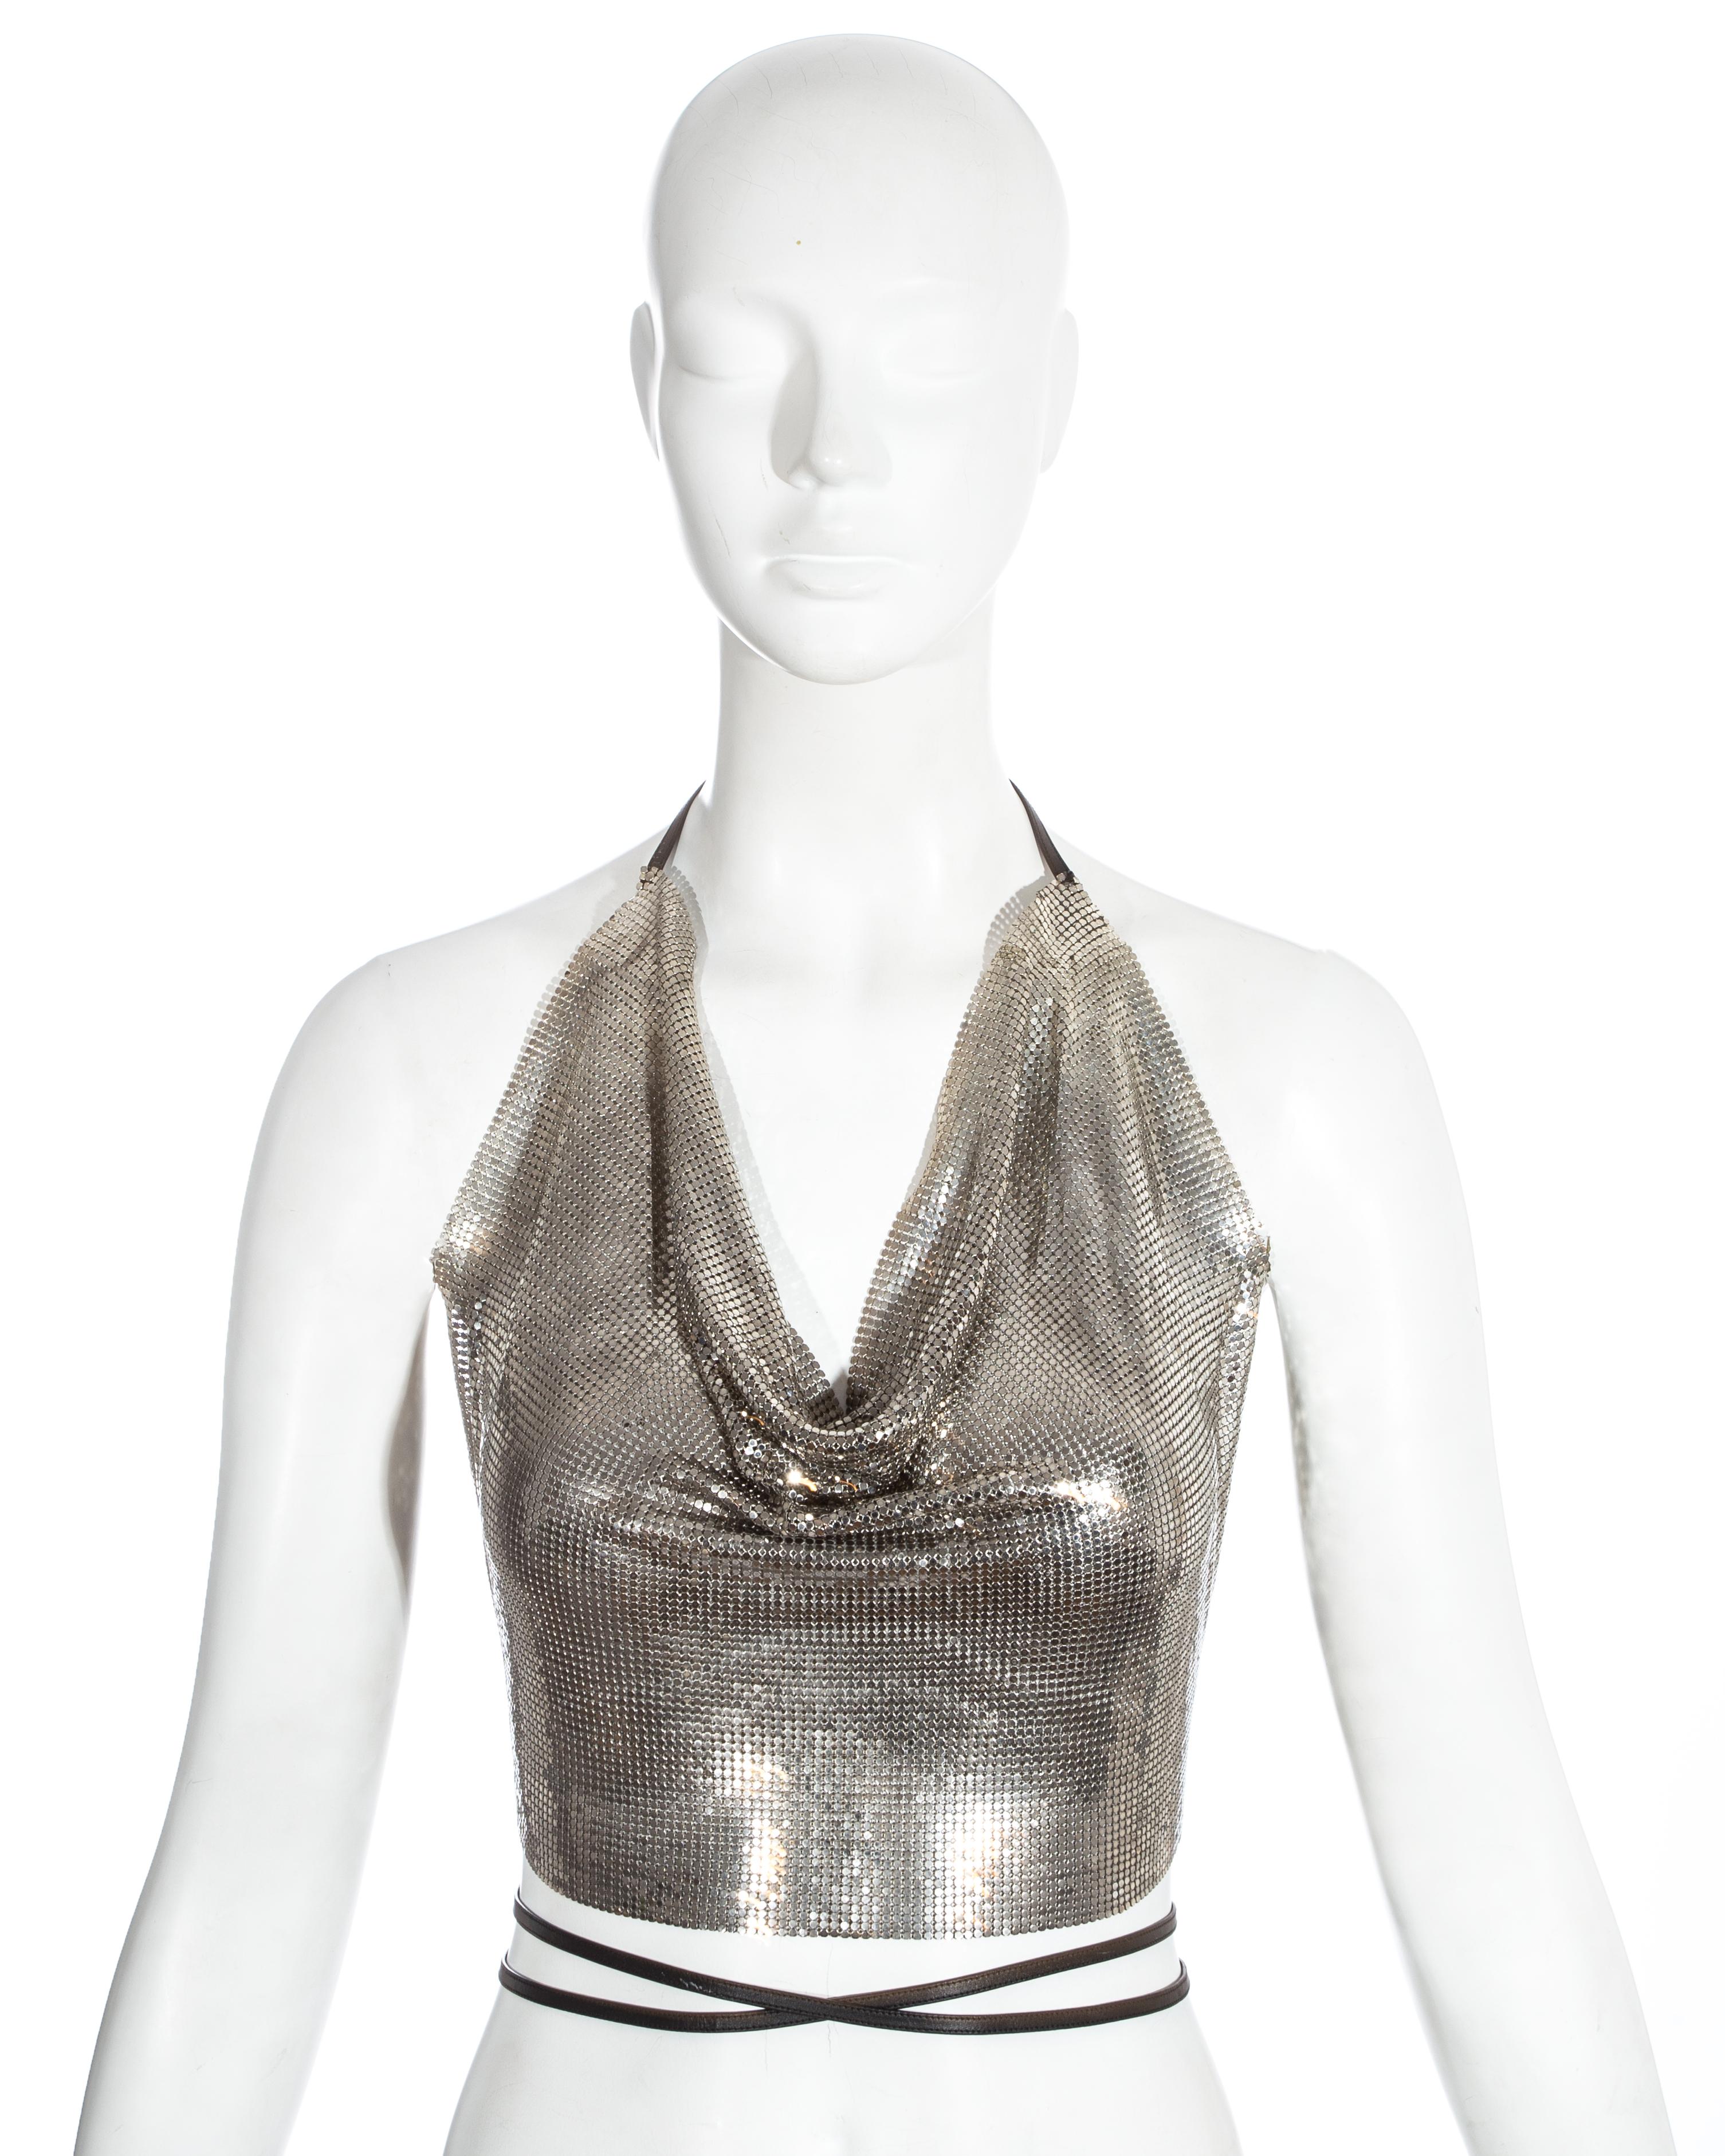 Paco Rabanne silver metal mesh chainmail halter neck vest with leather straps, c. 1960s